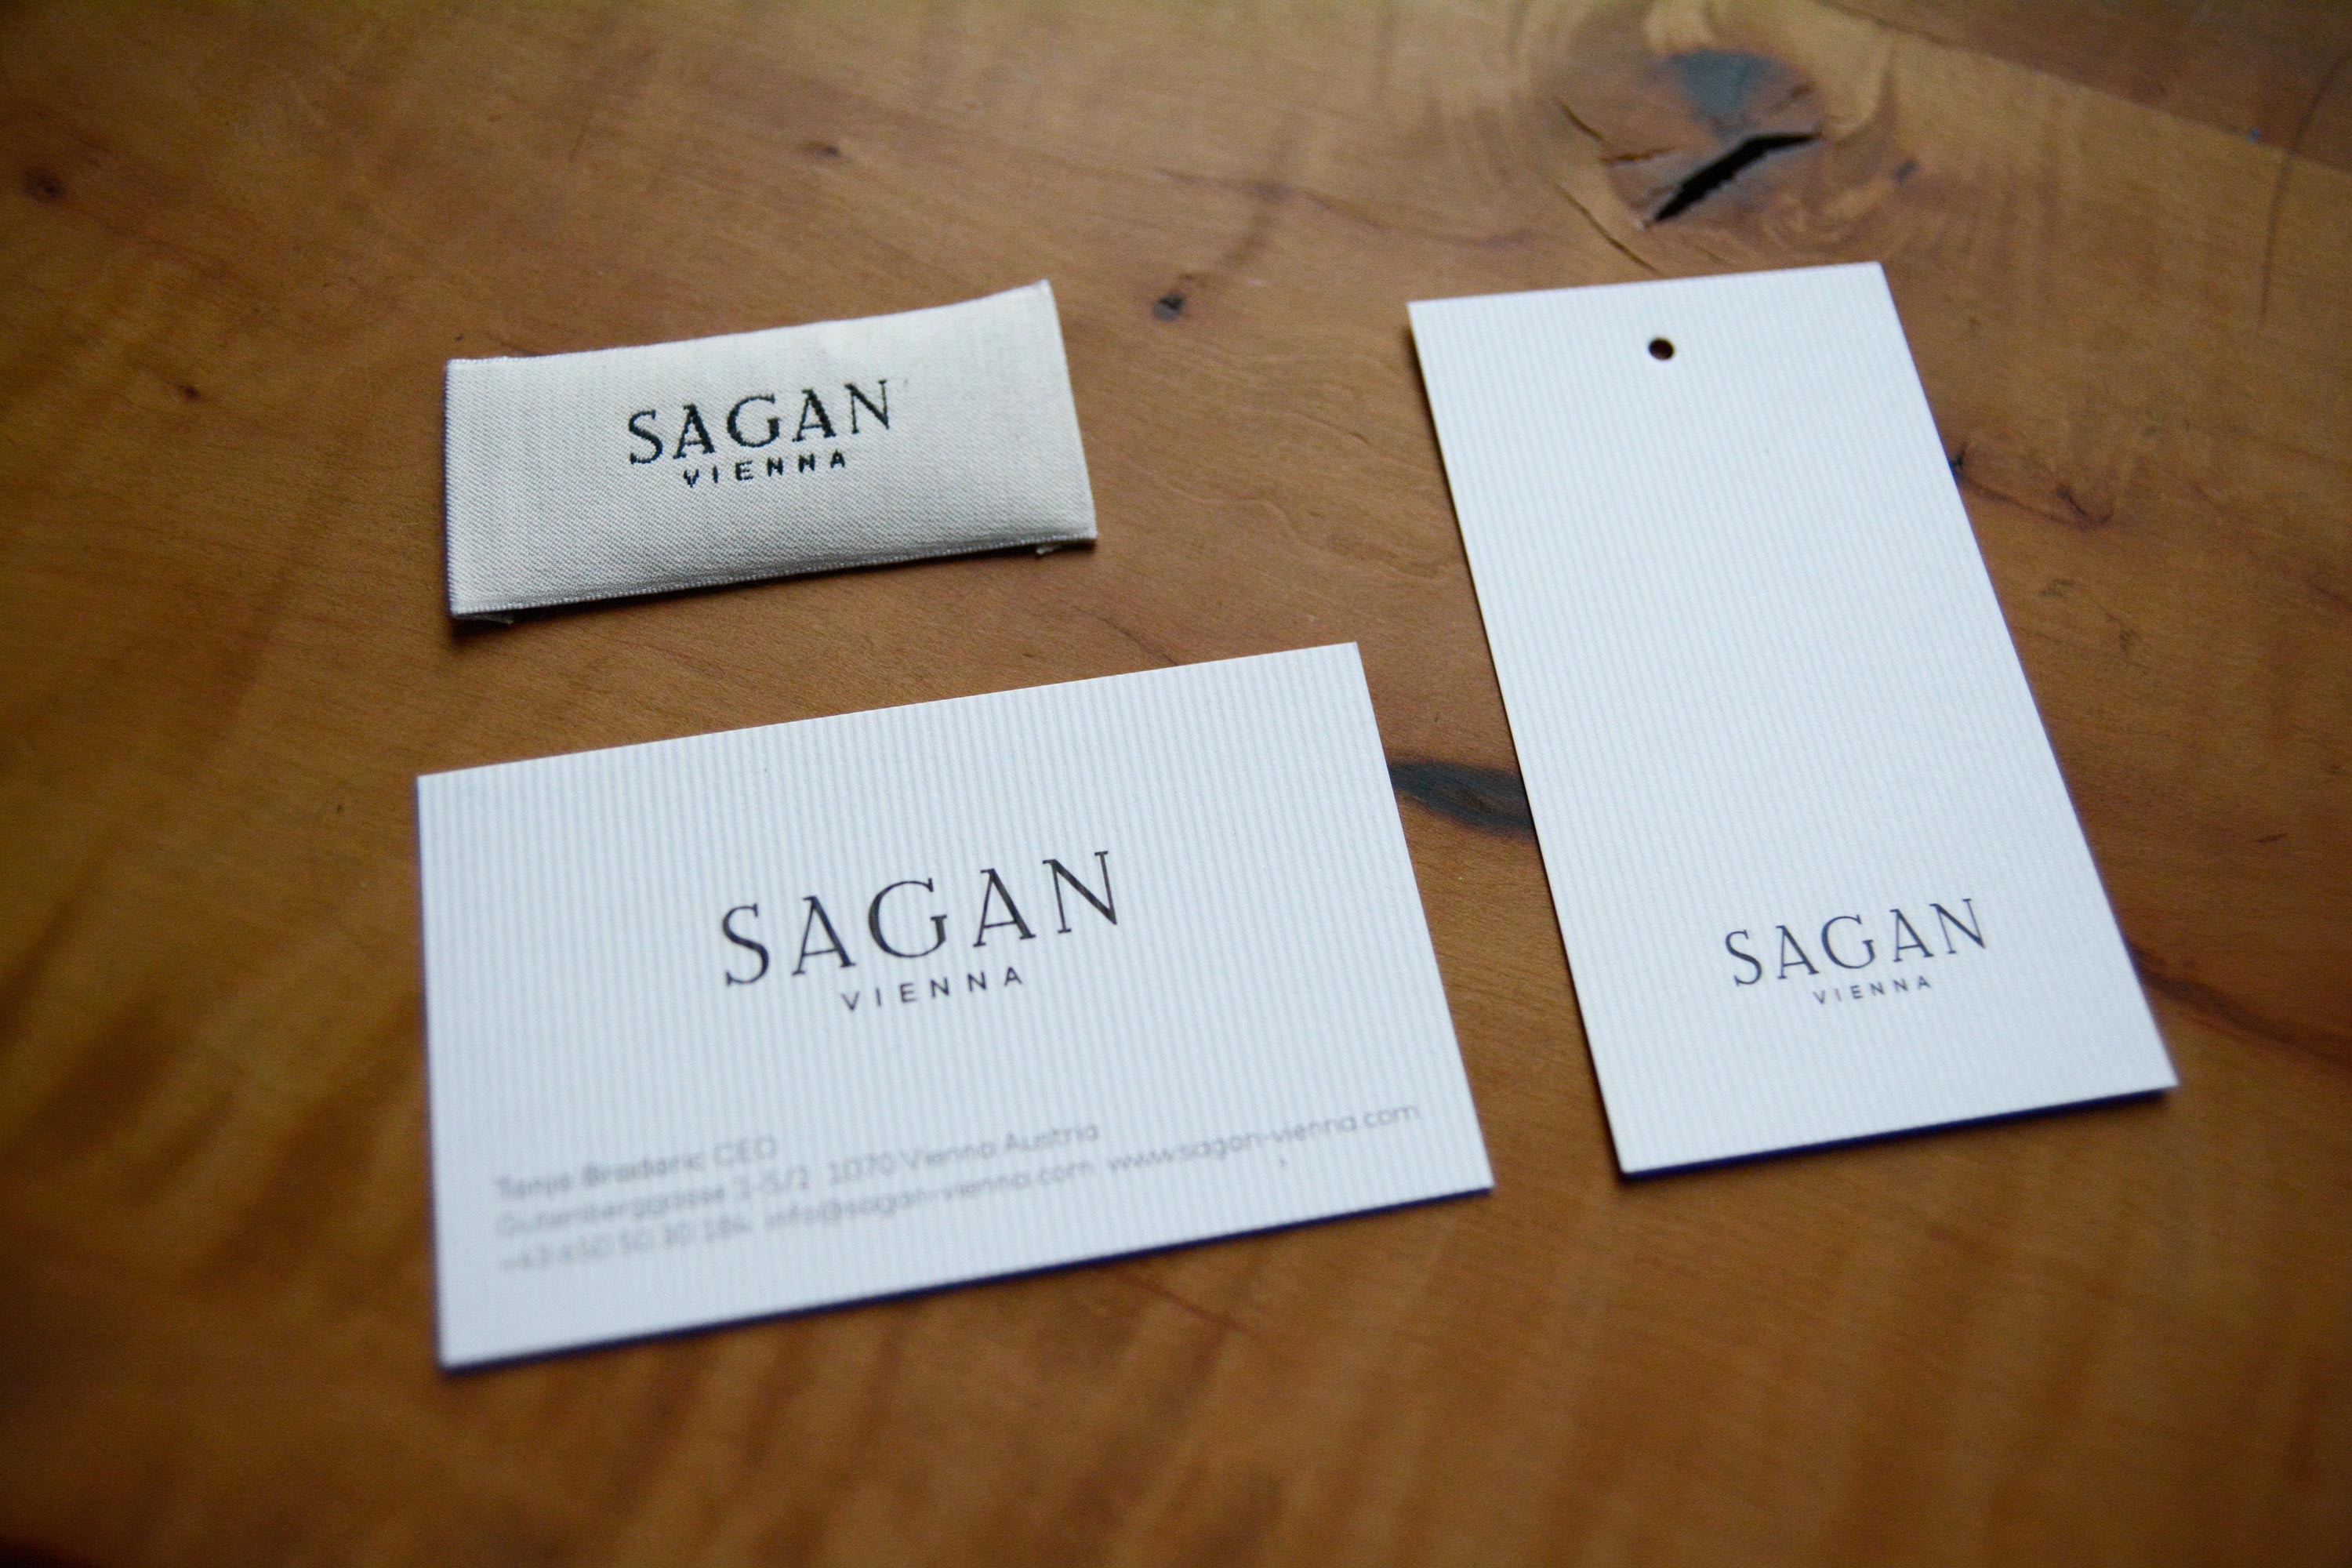 Small items lying on wooden table. Logo printed or stitched on each item.